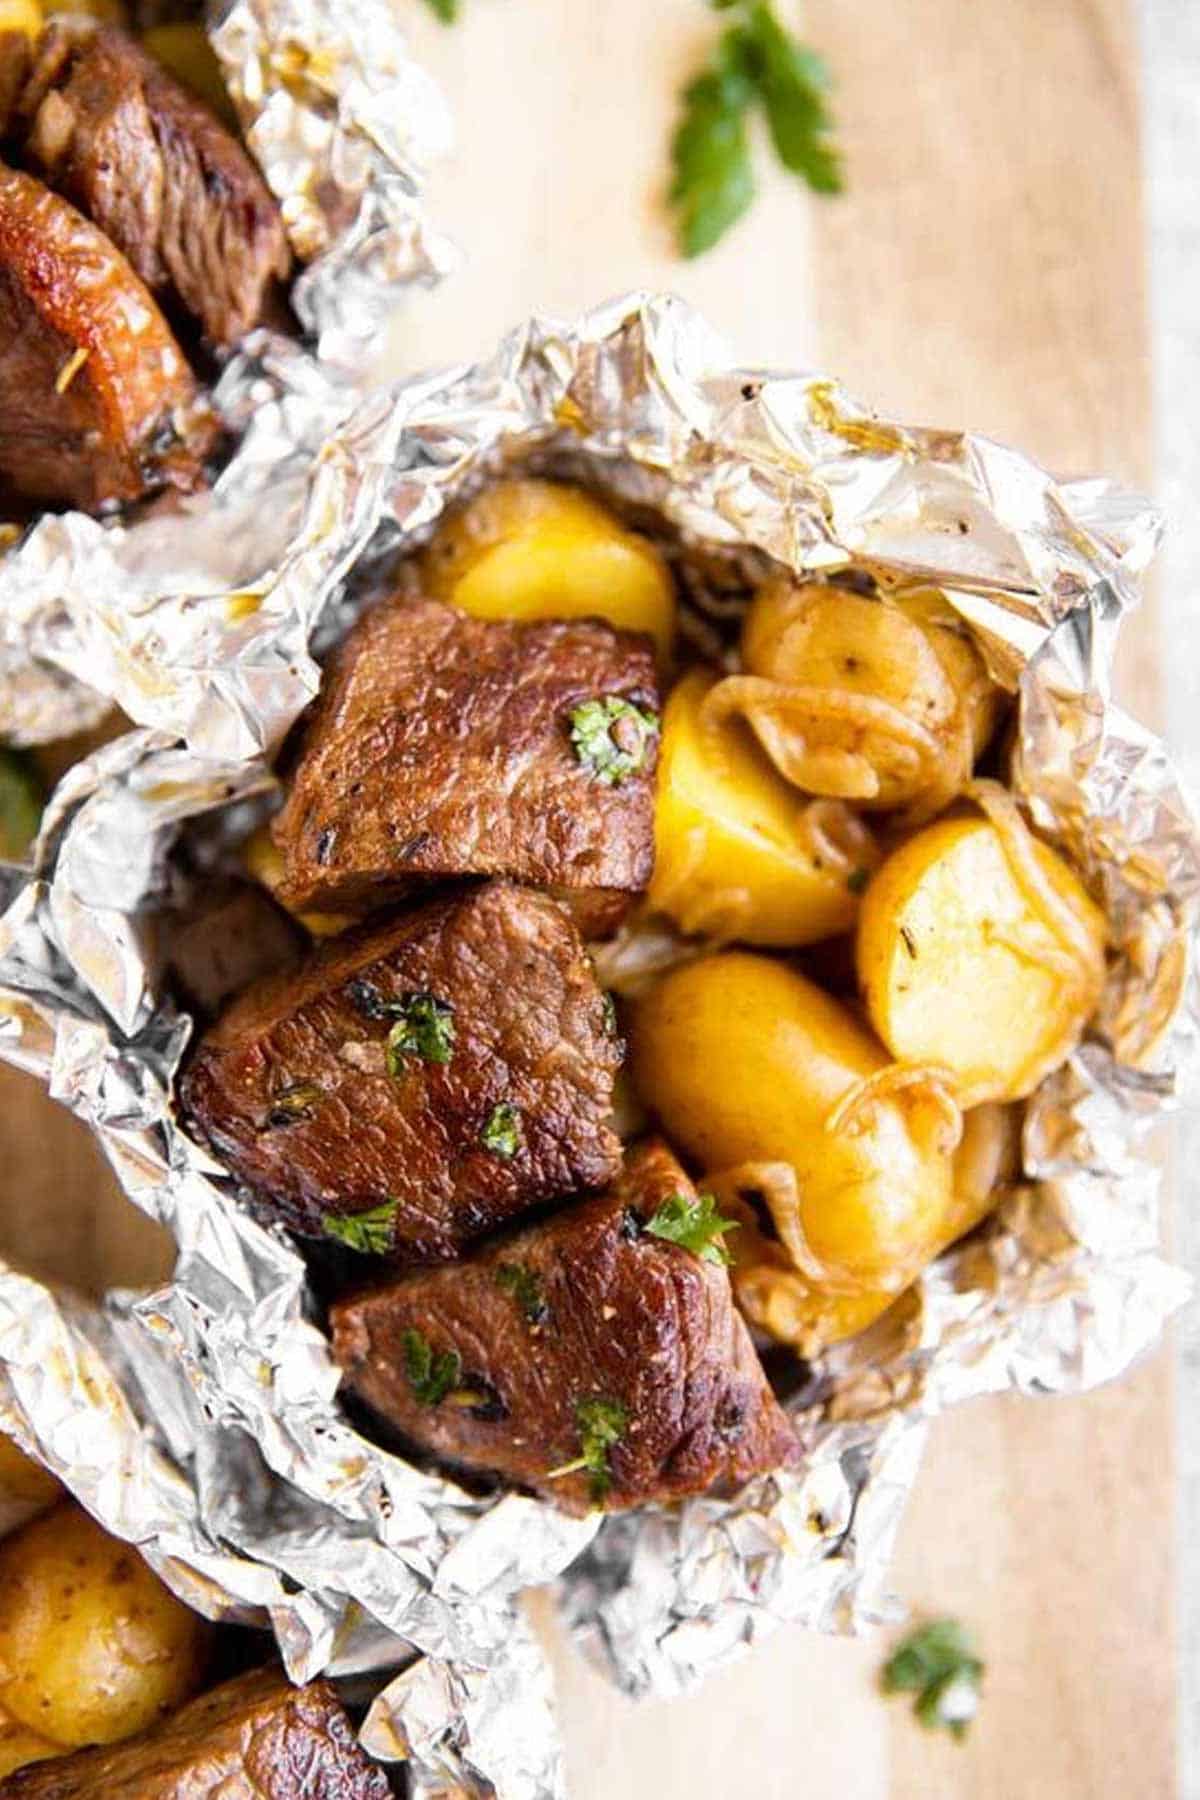 https://www.savorynothings.com/wp-content/uploads/2021/04/steak-and-potato-foil-packets-image-4.jpg